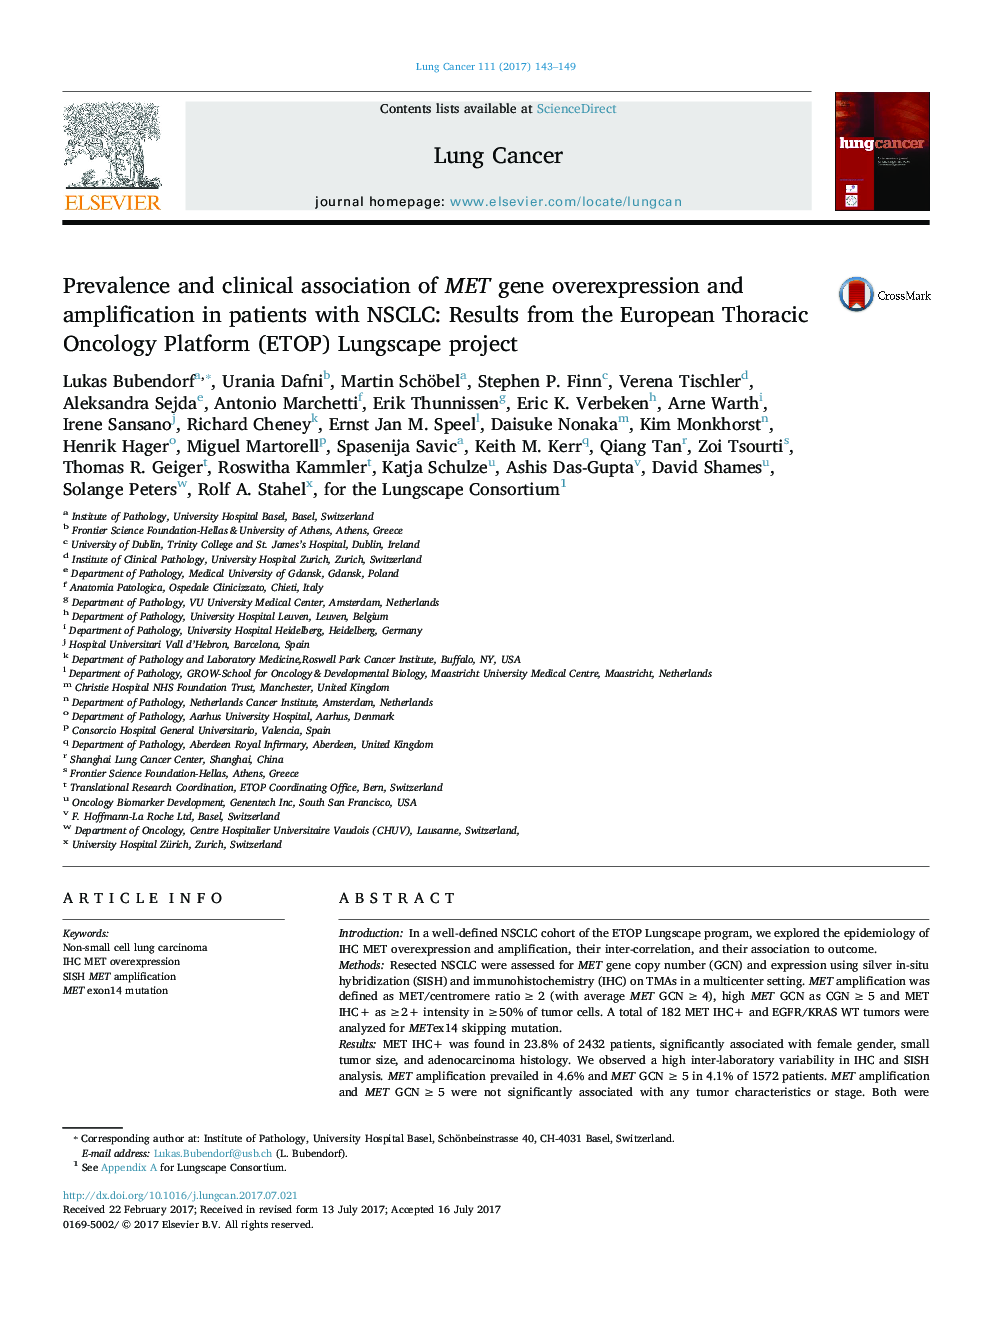 Prevalence and clinical association of MET gene overexpression and amplification in patients with NSCLC: Results from the European Thoracic Oncology Platform (ETOP) Lungscape project